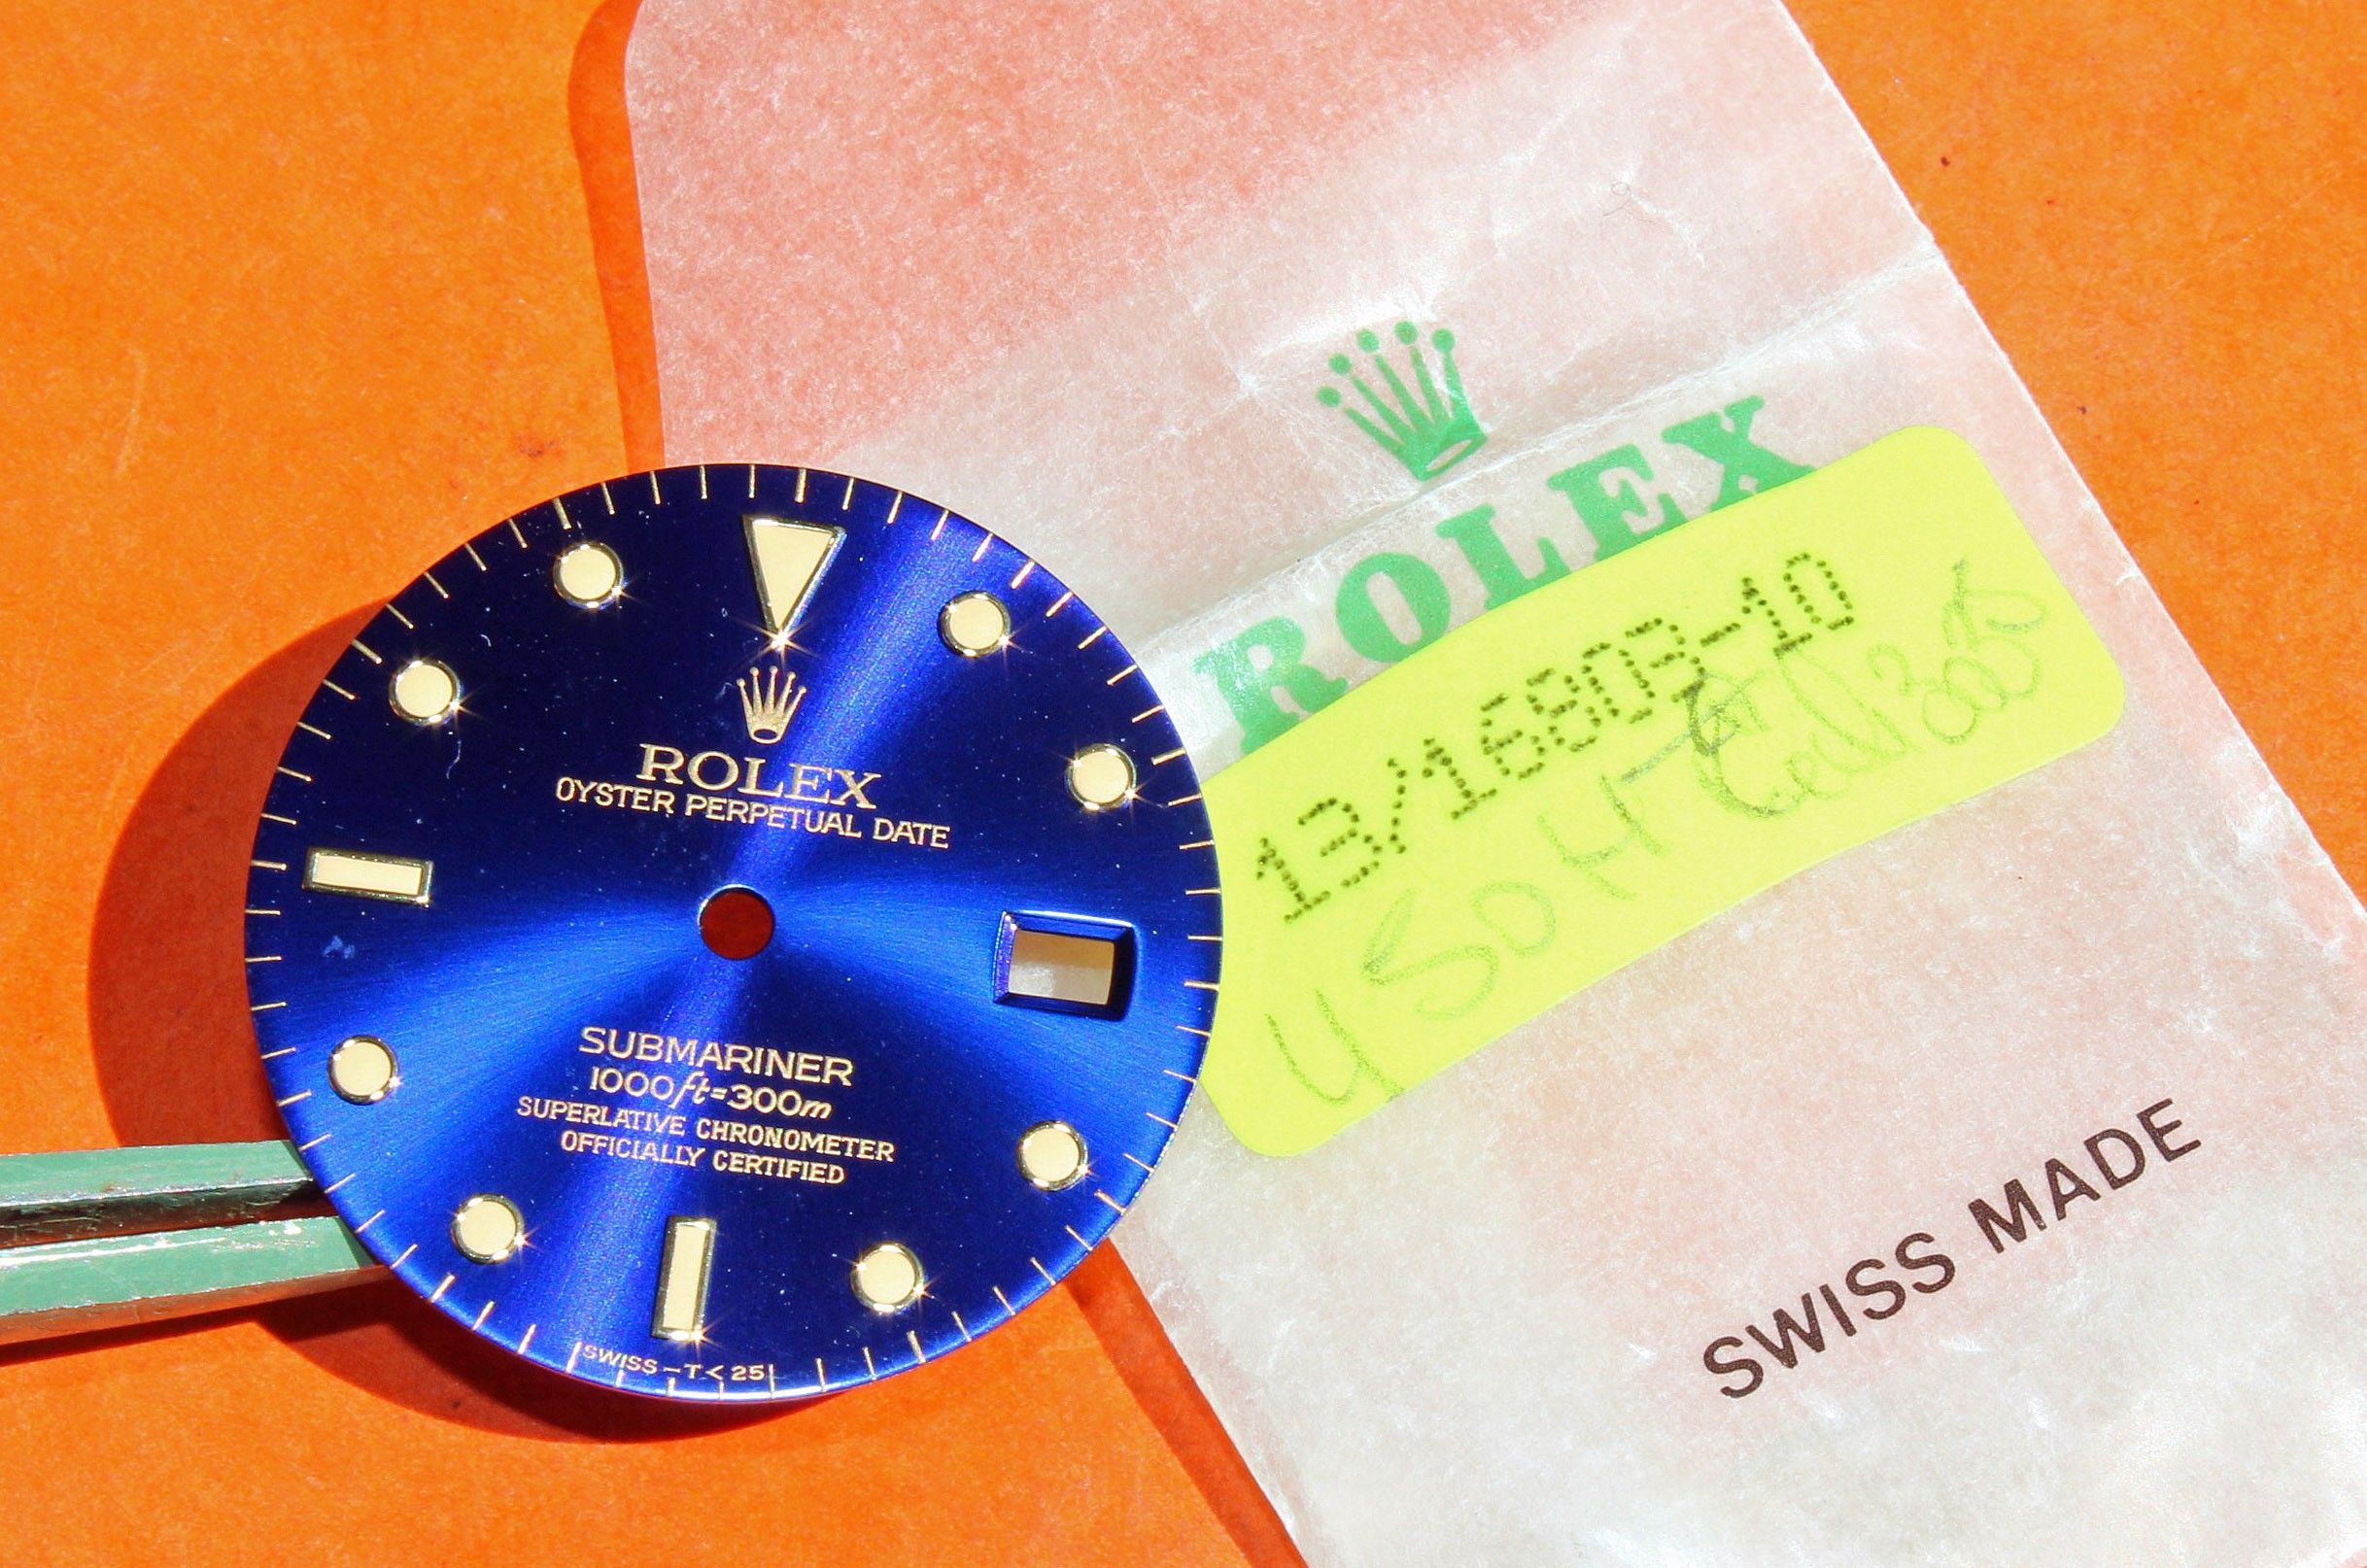 Rolex Submariner date NOS Automatic Tutone 18kt Yellow Gold & Steel Blue Dial 16803, 16613, 16618, 16808 CAL.3035, 3135